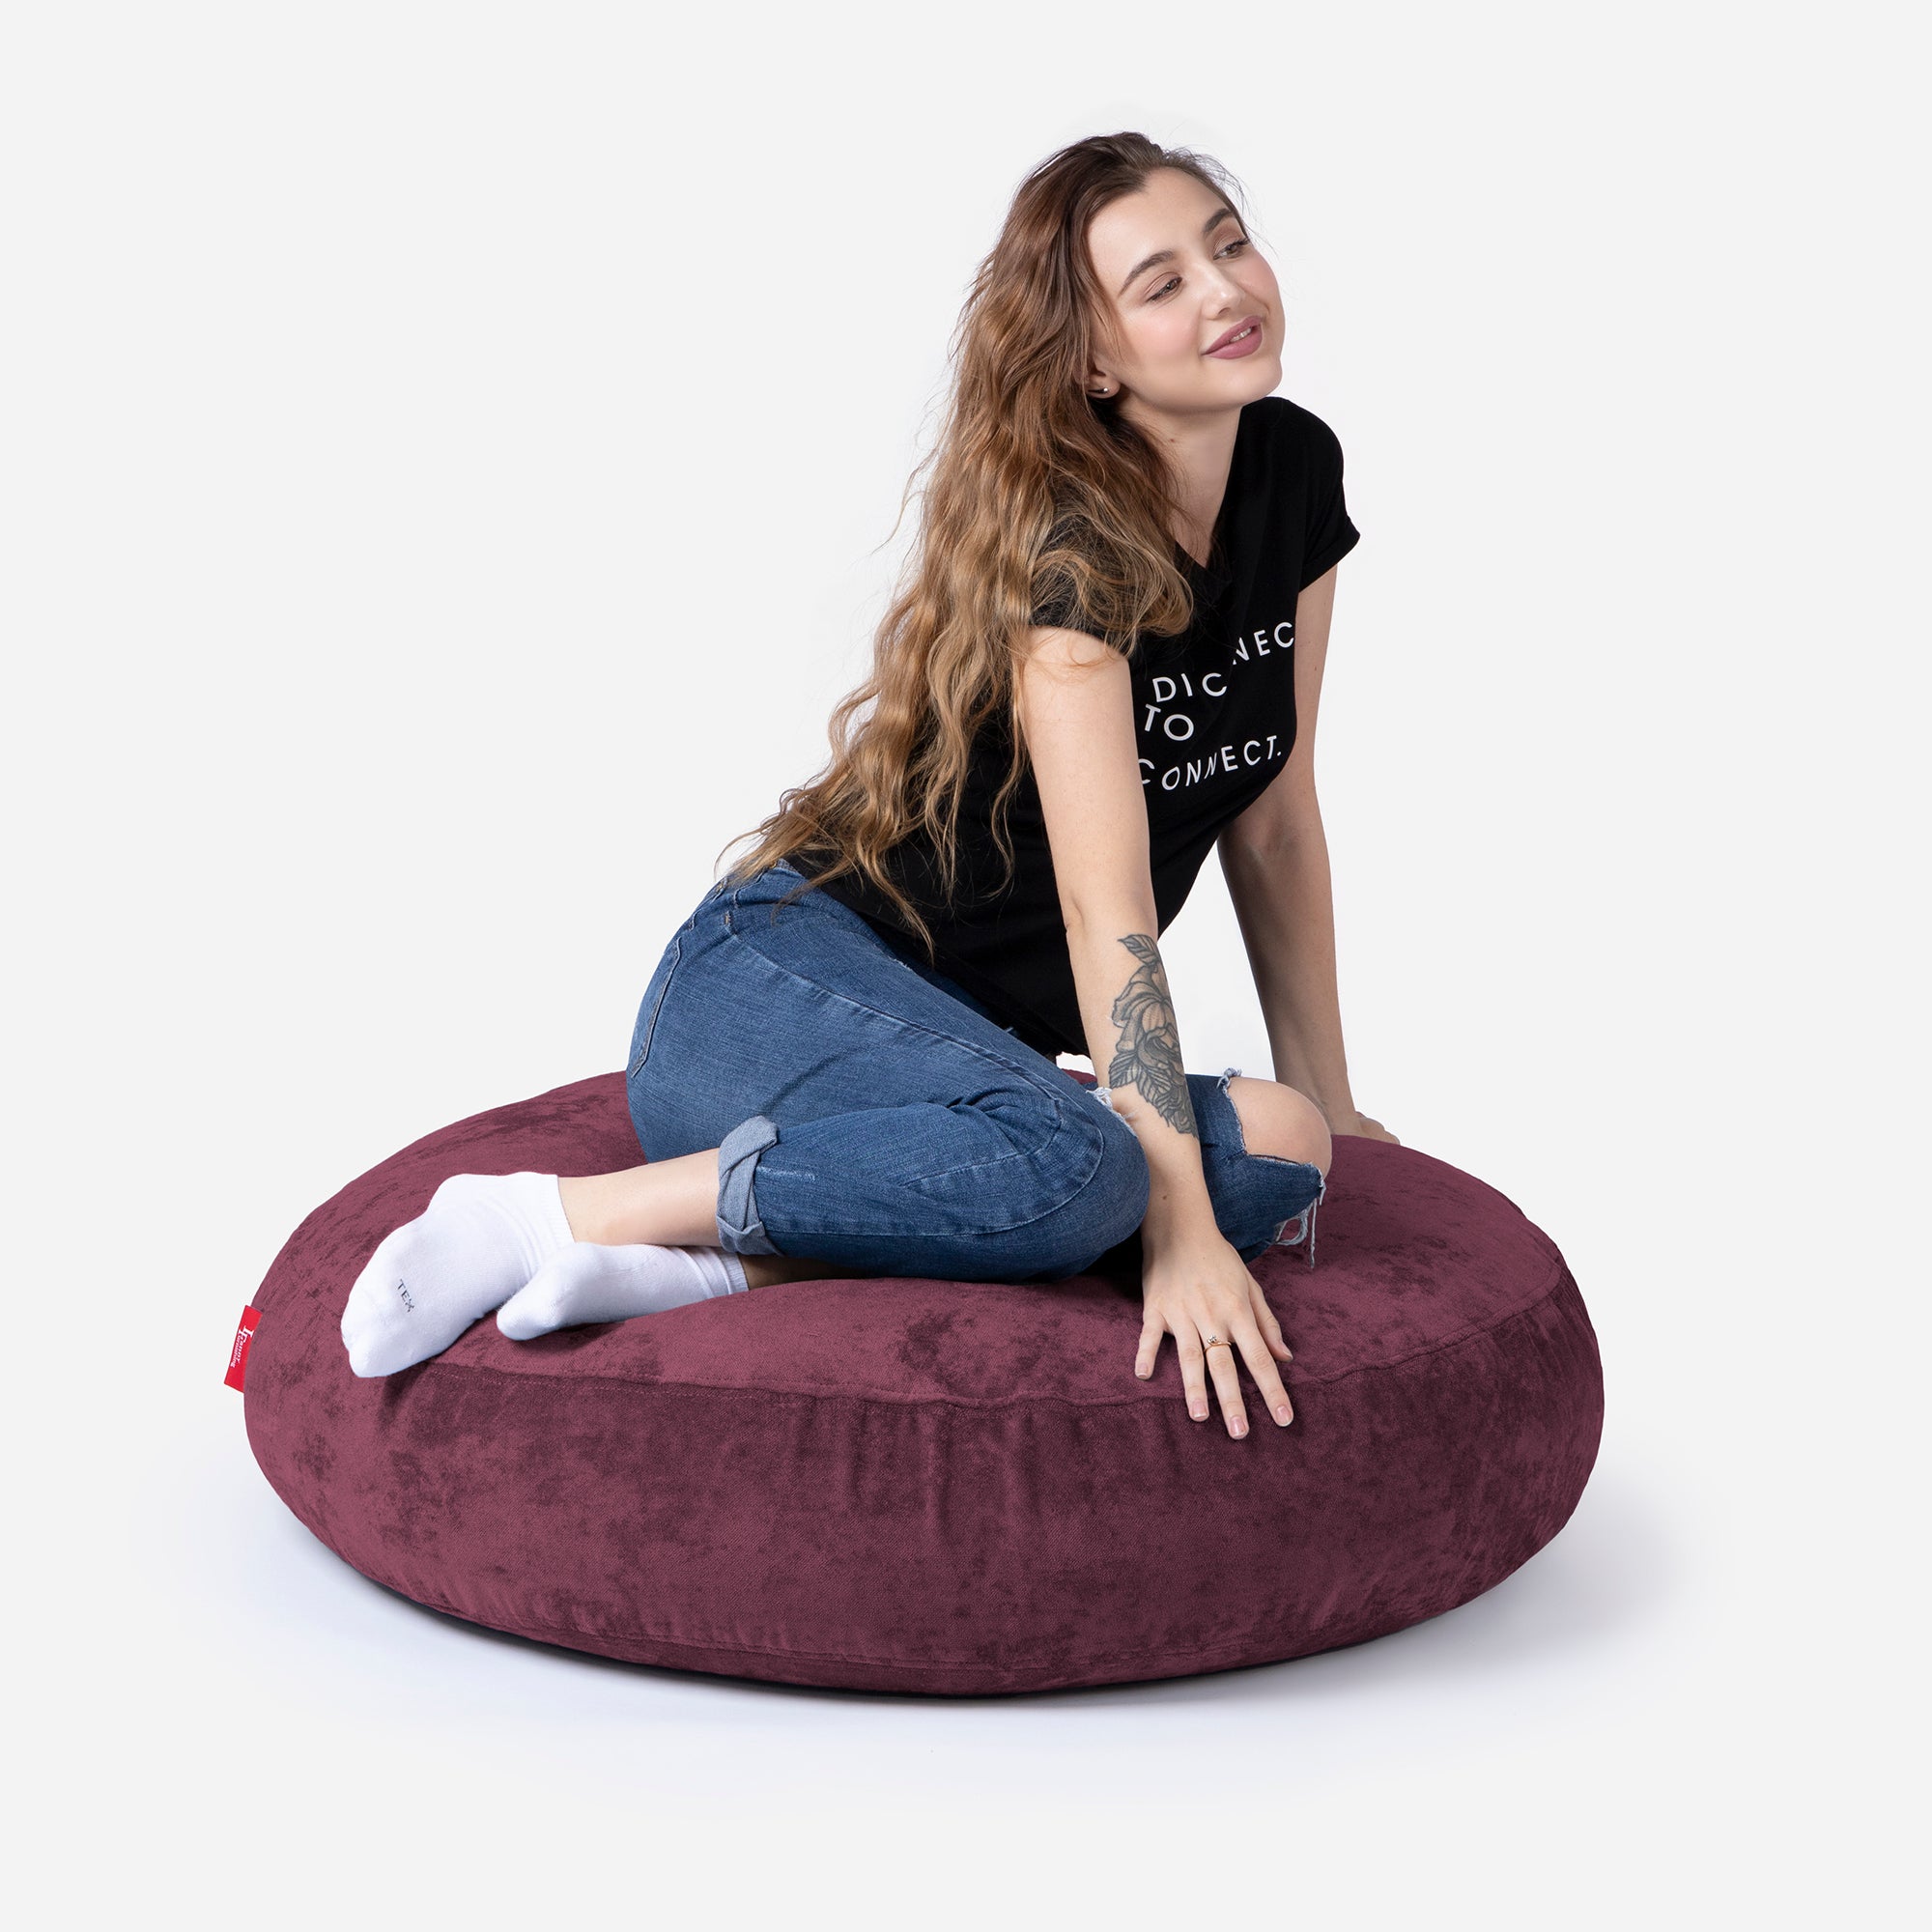 Pouf, Ottoman Purple color by Lanny with girl seating on it 